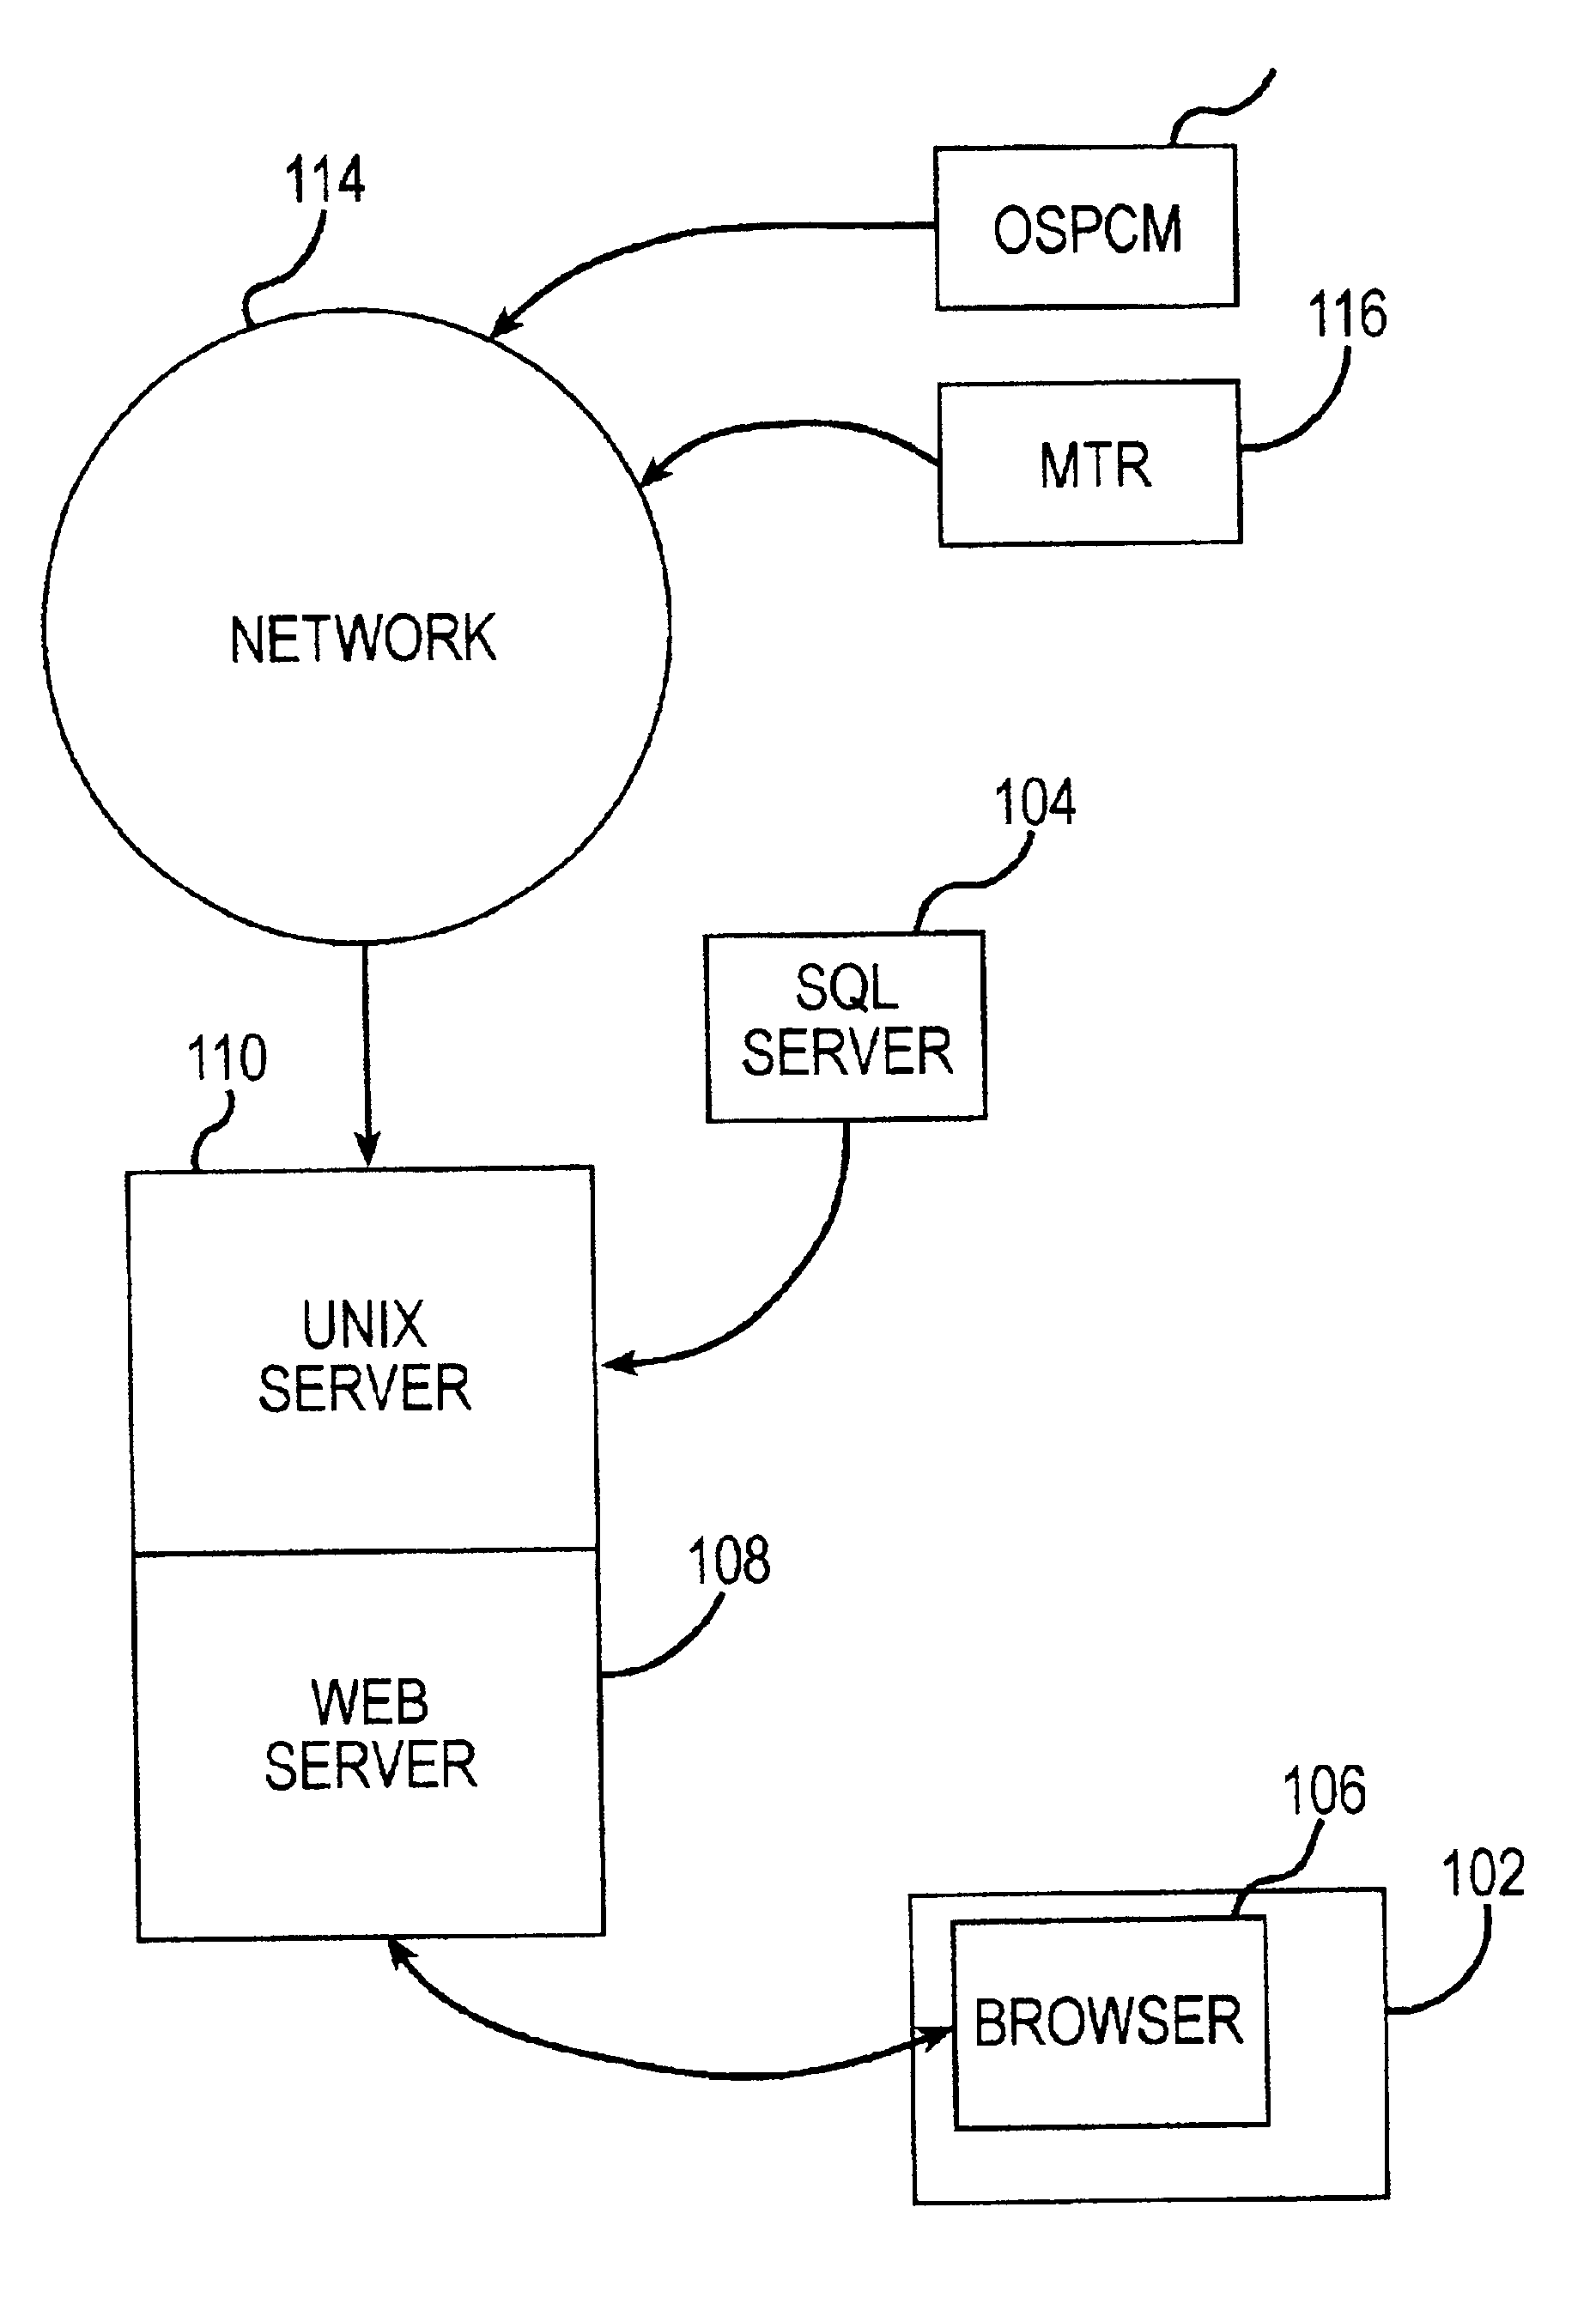 System and method for priority-based work order scheduling